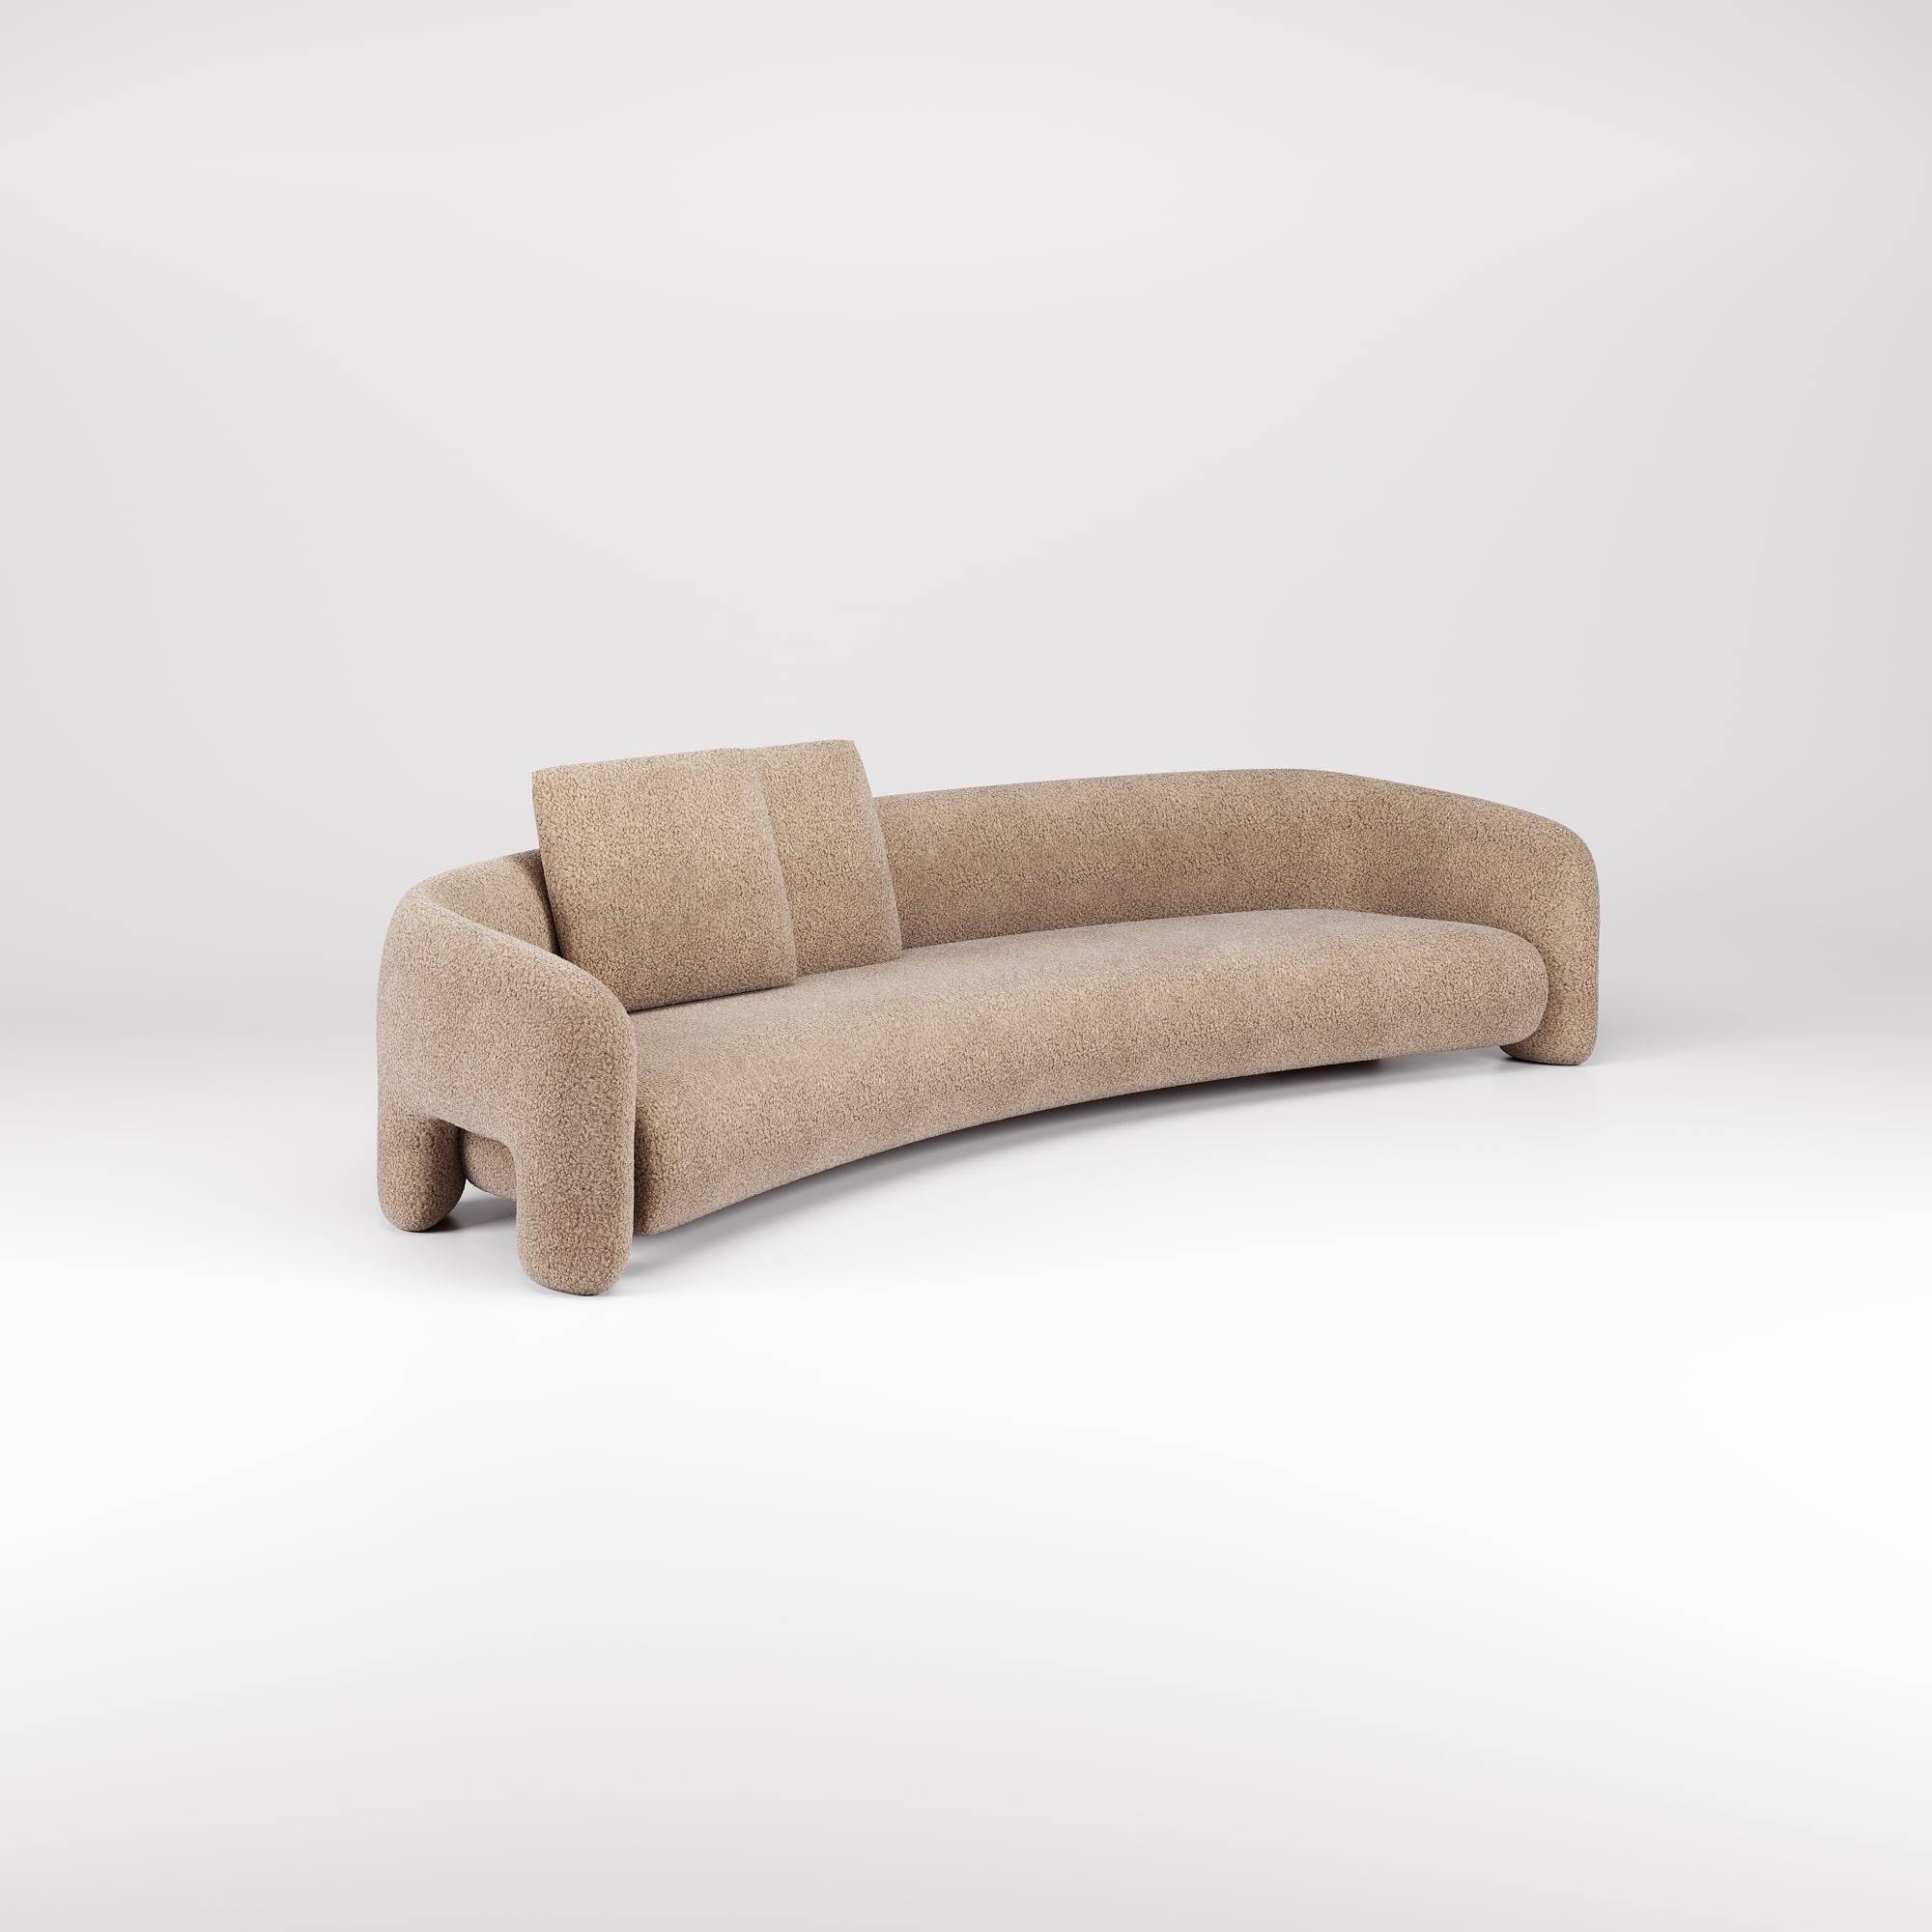 With its contemporary design, this version of the Bold Sofa Curved introduces new dimensions of comfort, offering expanded space for ultimate relaxation.

The fluid lines and organic curves, combined with its open arms feature, further amplify the